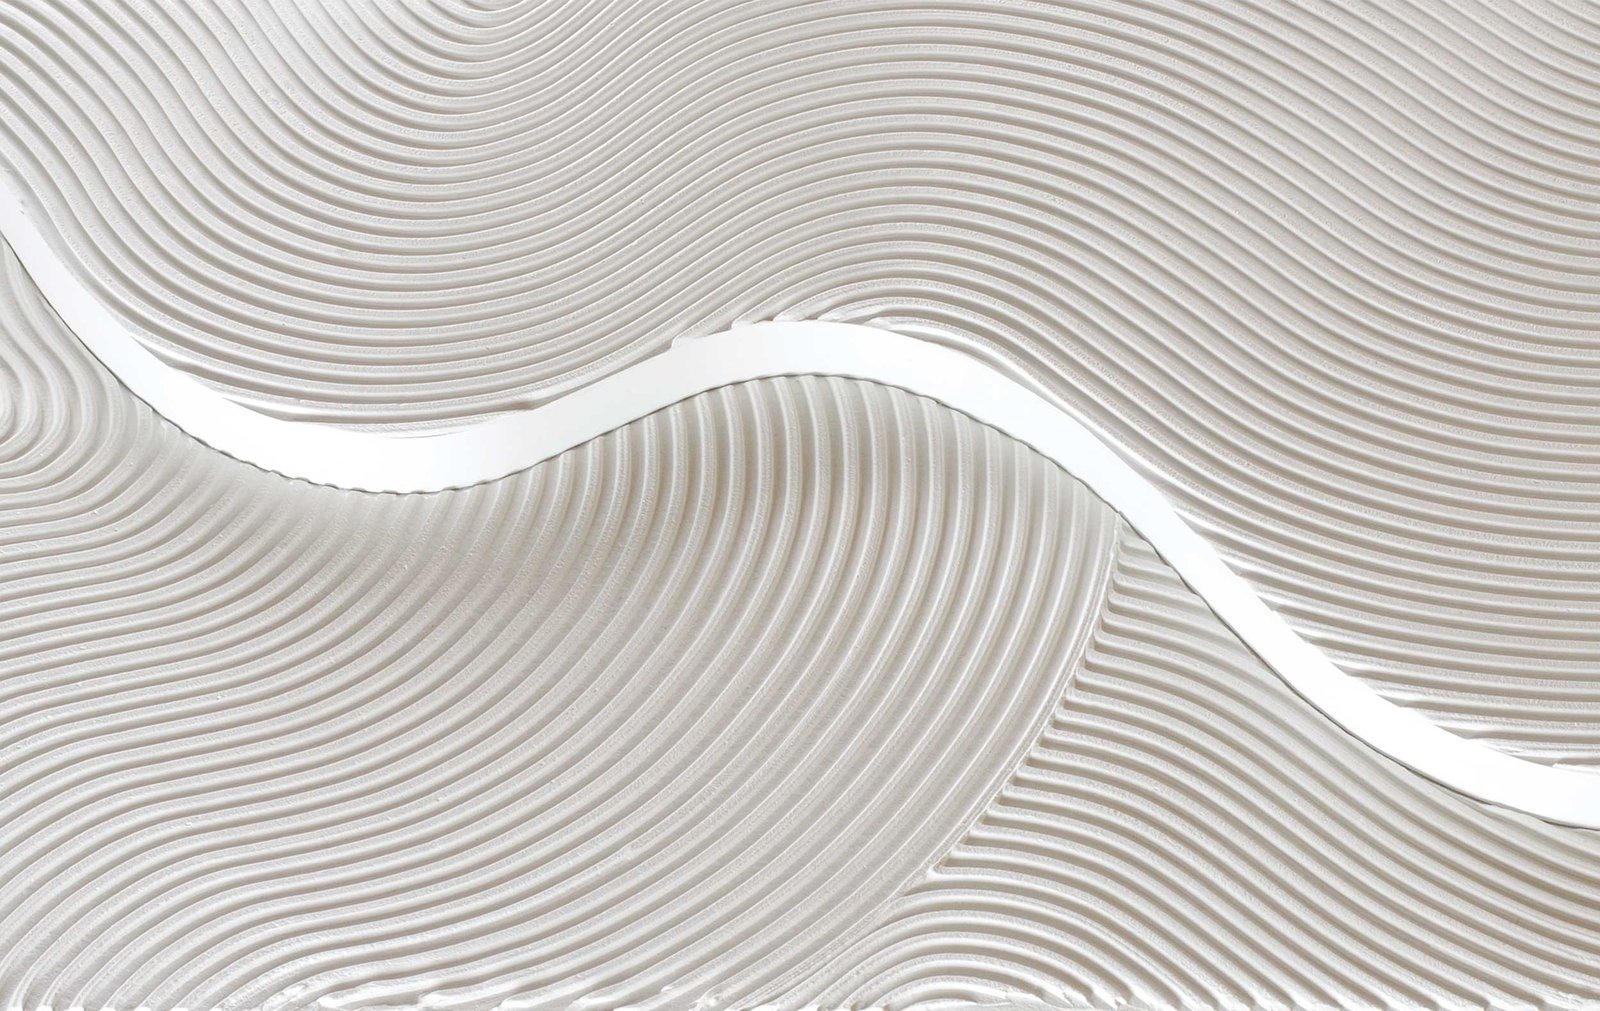 Image of Waves Relief · White No. 3 (sold)